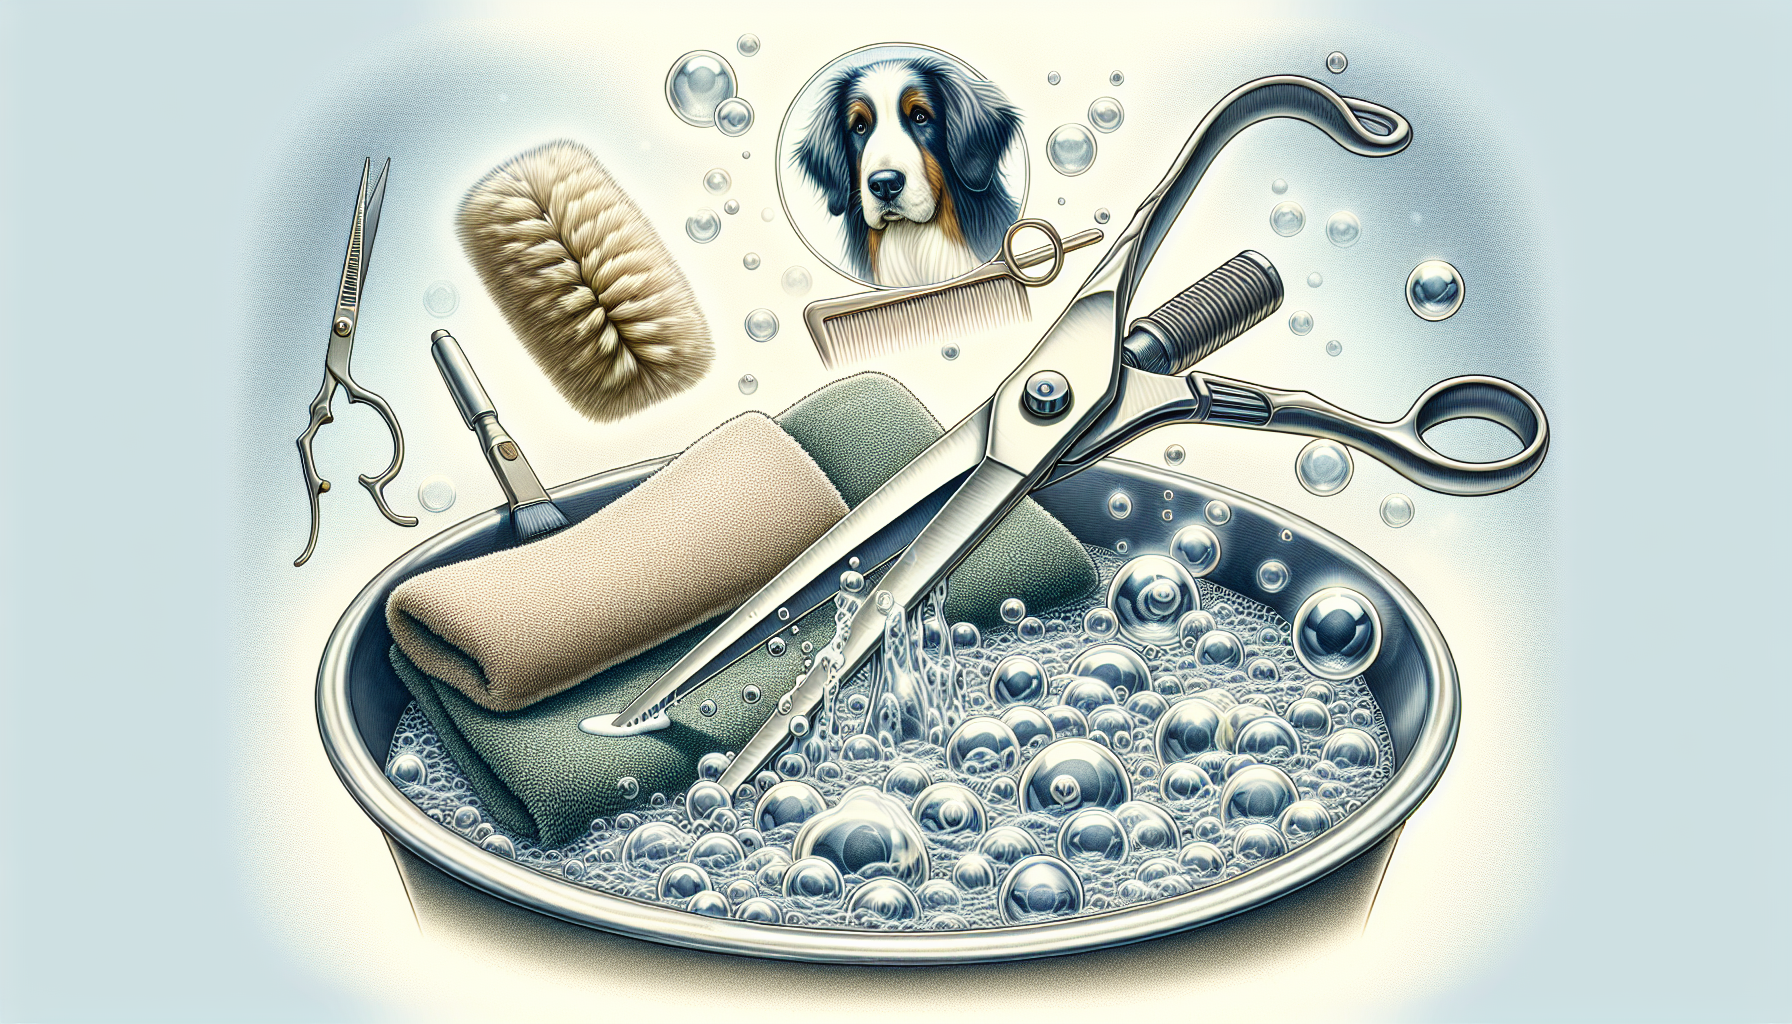 Sanitizing and cleaning of dog grooming scissors